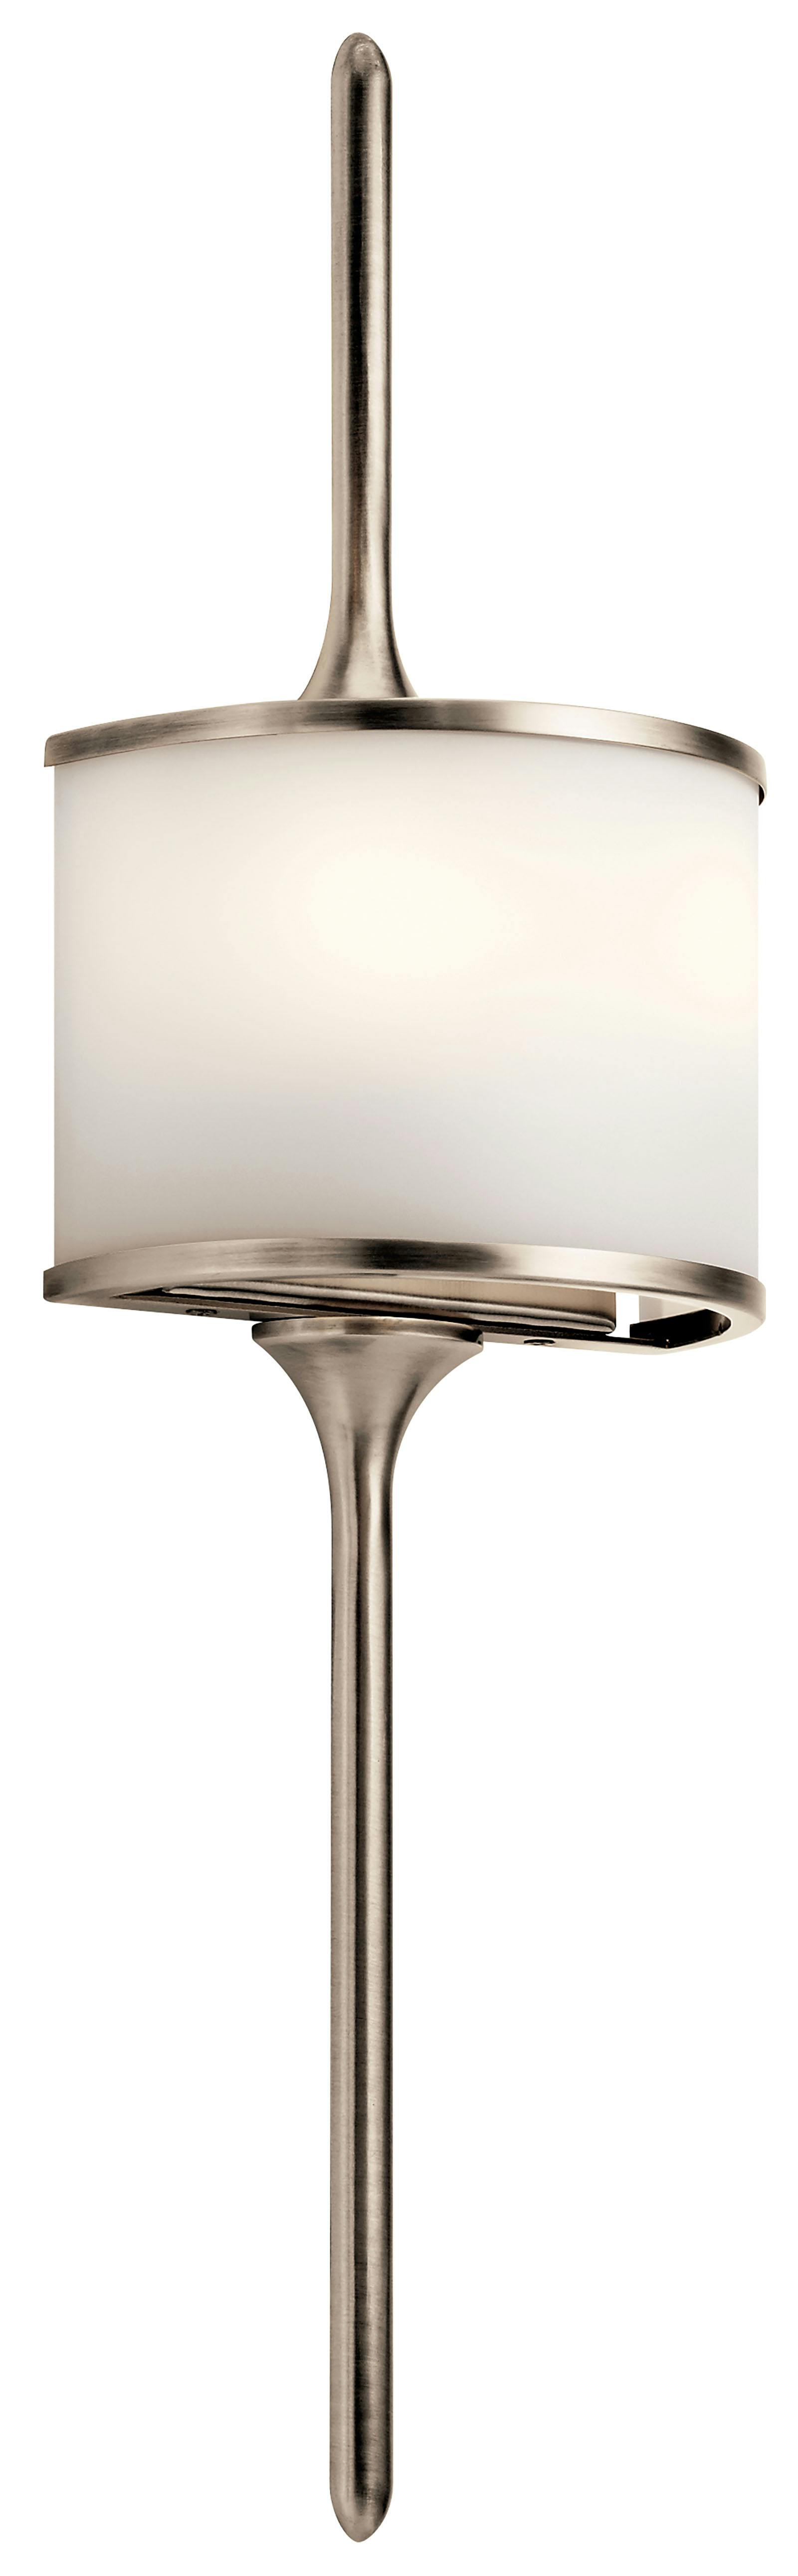 Mona 22" 2 Light Halogen Sconce in Pewter on a white background